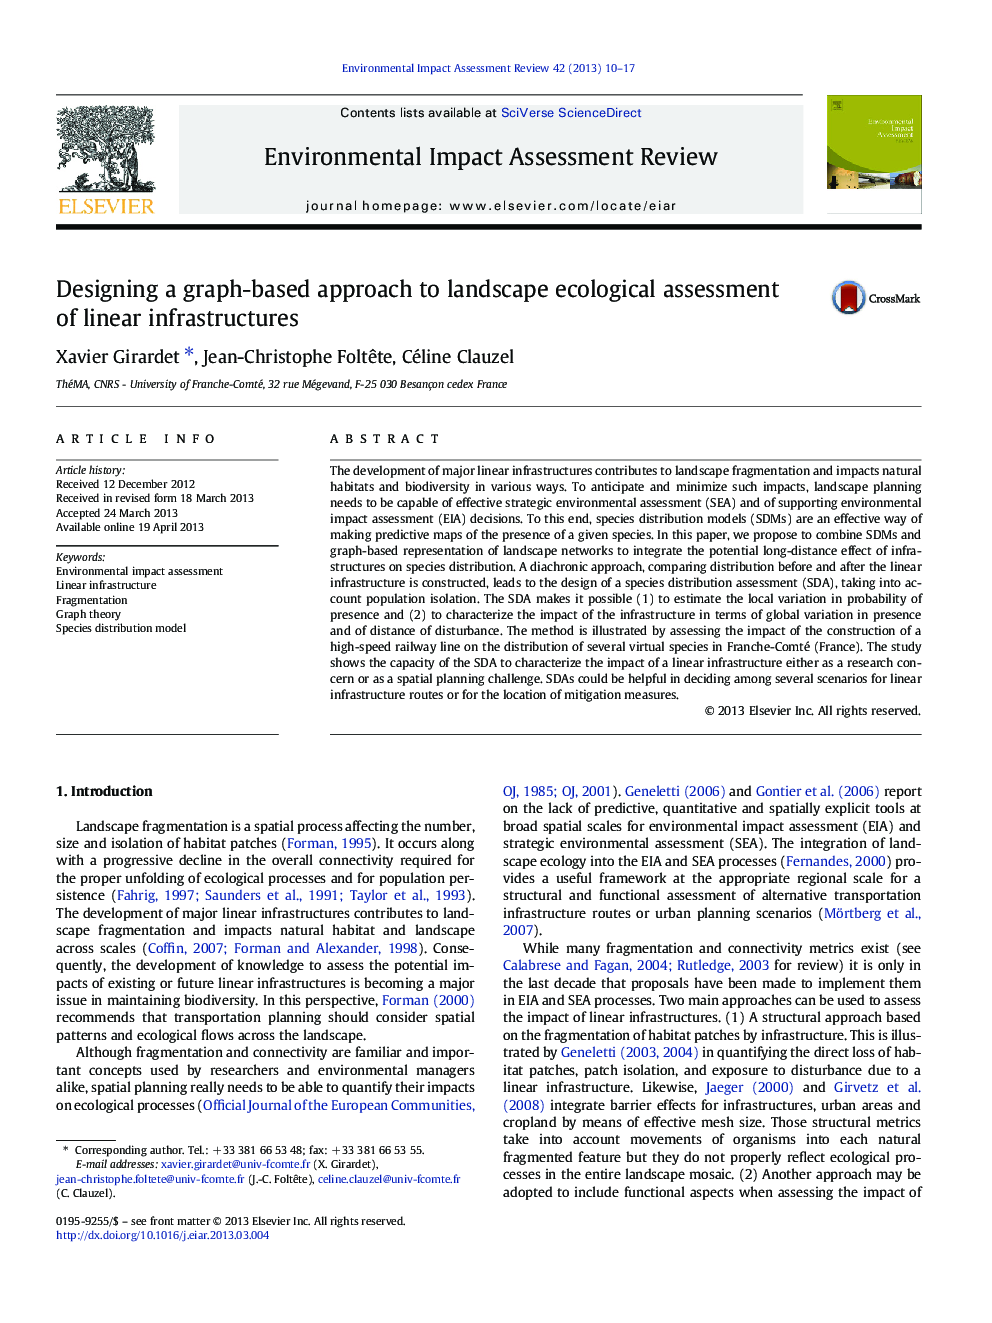 Designing a graph-based approach to landscape ecological assessment of linear infrastructures